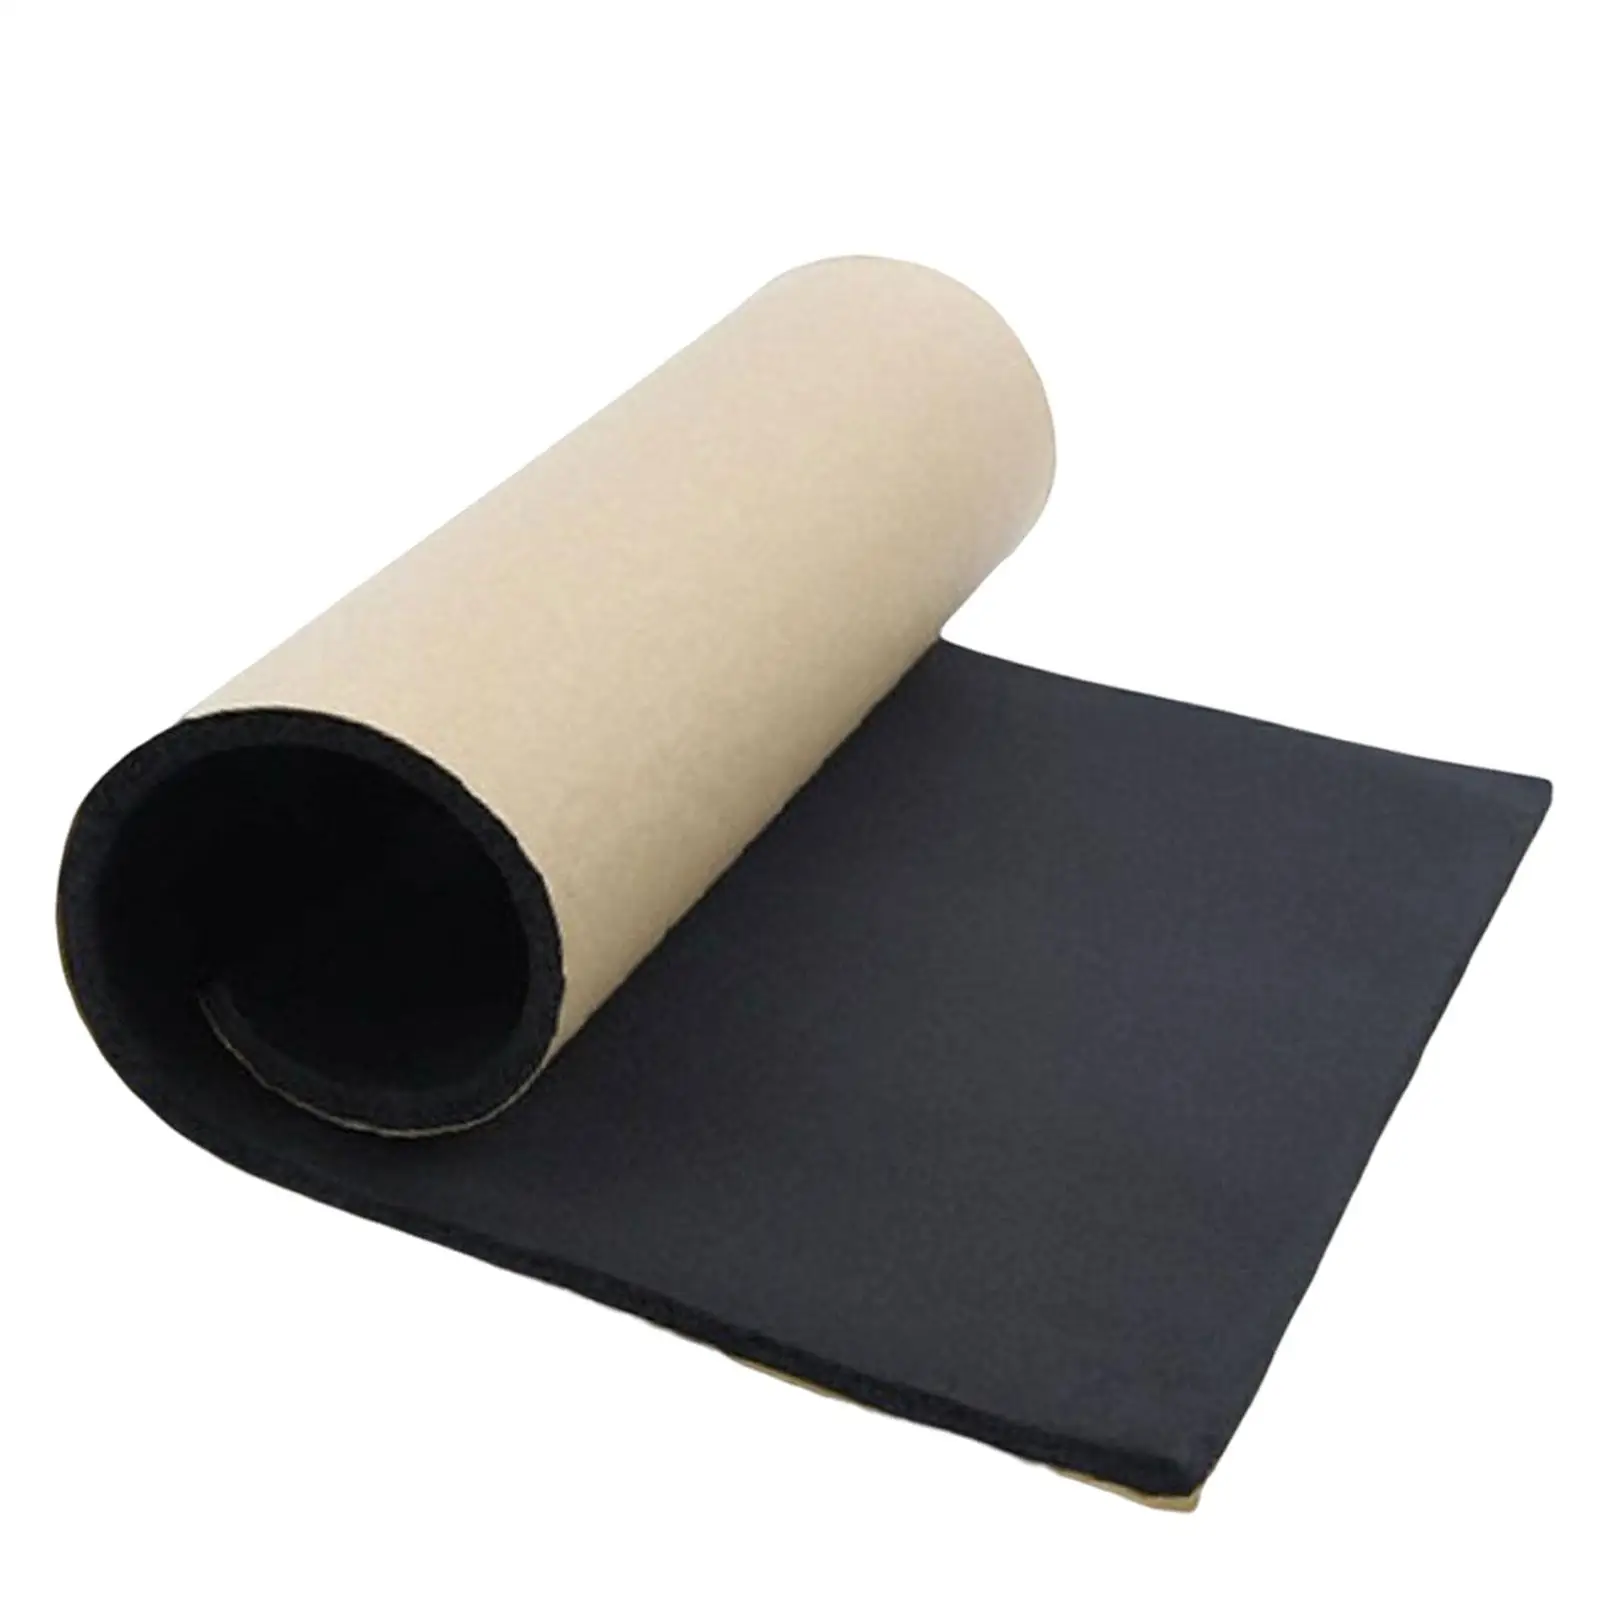 Audio noise and deadening car sound deadening mat, thermal